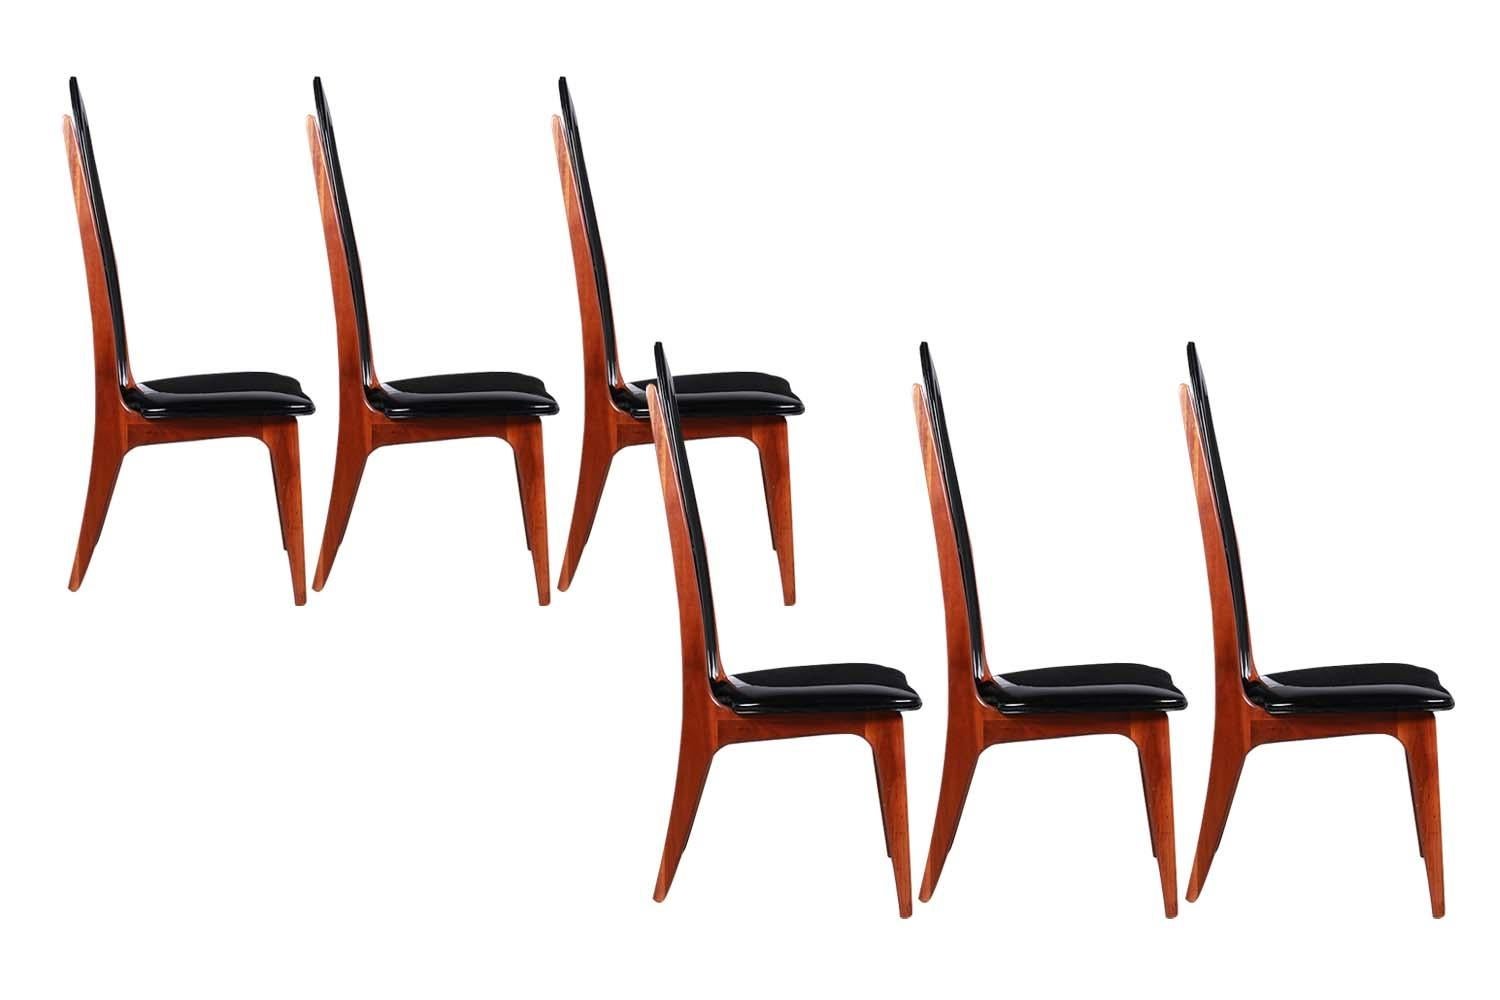 An outstanding set of six mid century dining chairs attributed to Adrian Pearsall. This stunning set of six highback chairs features high arched backs with two sleek walnut rails centered on the back over a walnut frame with splayed legs give these